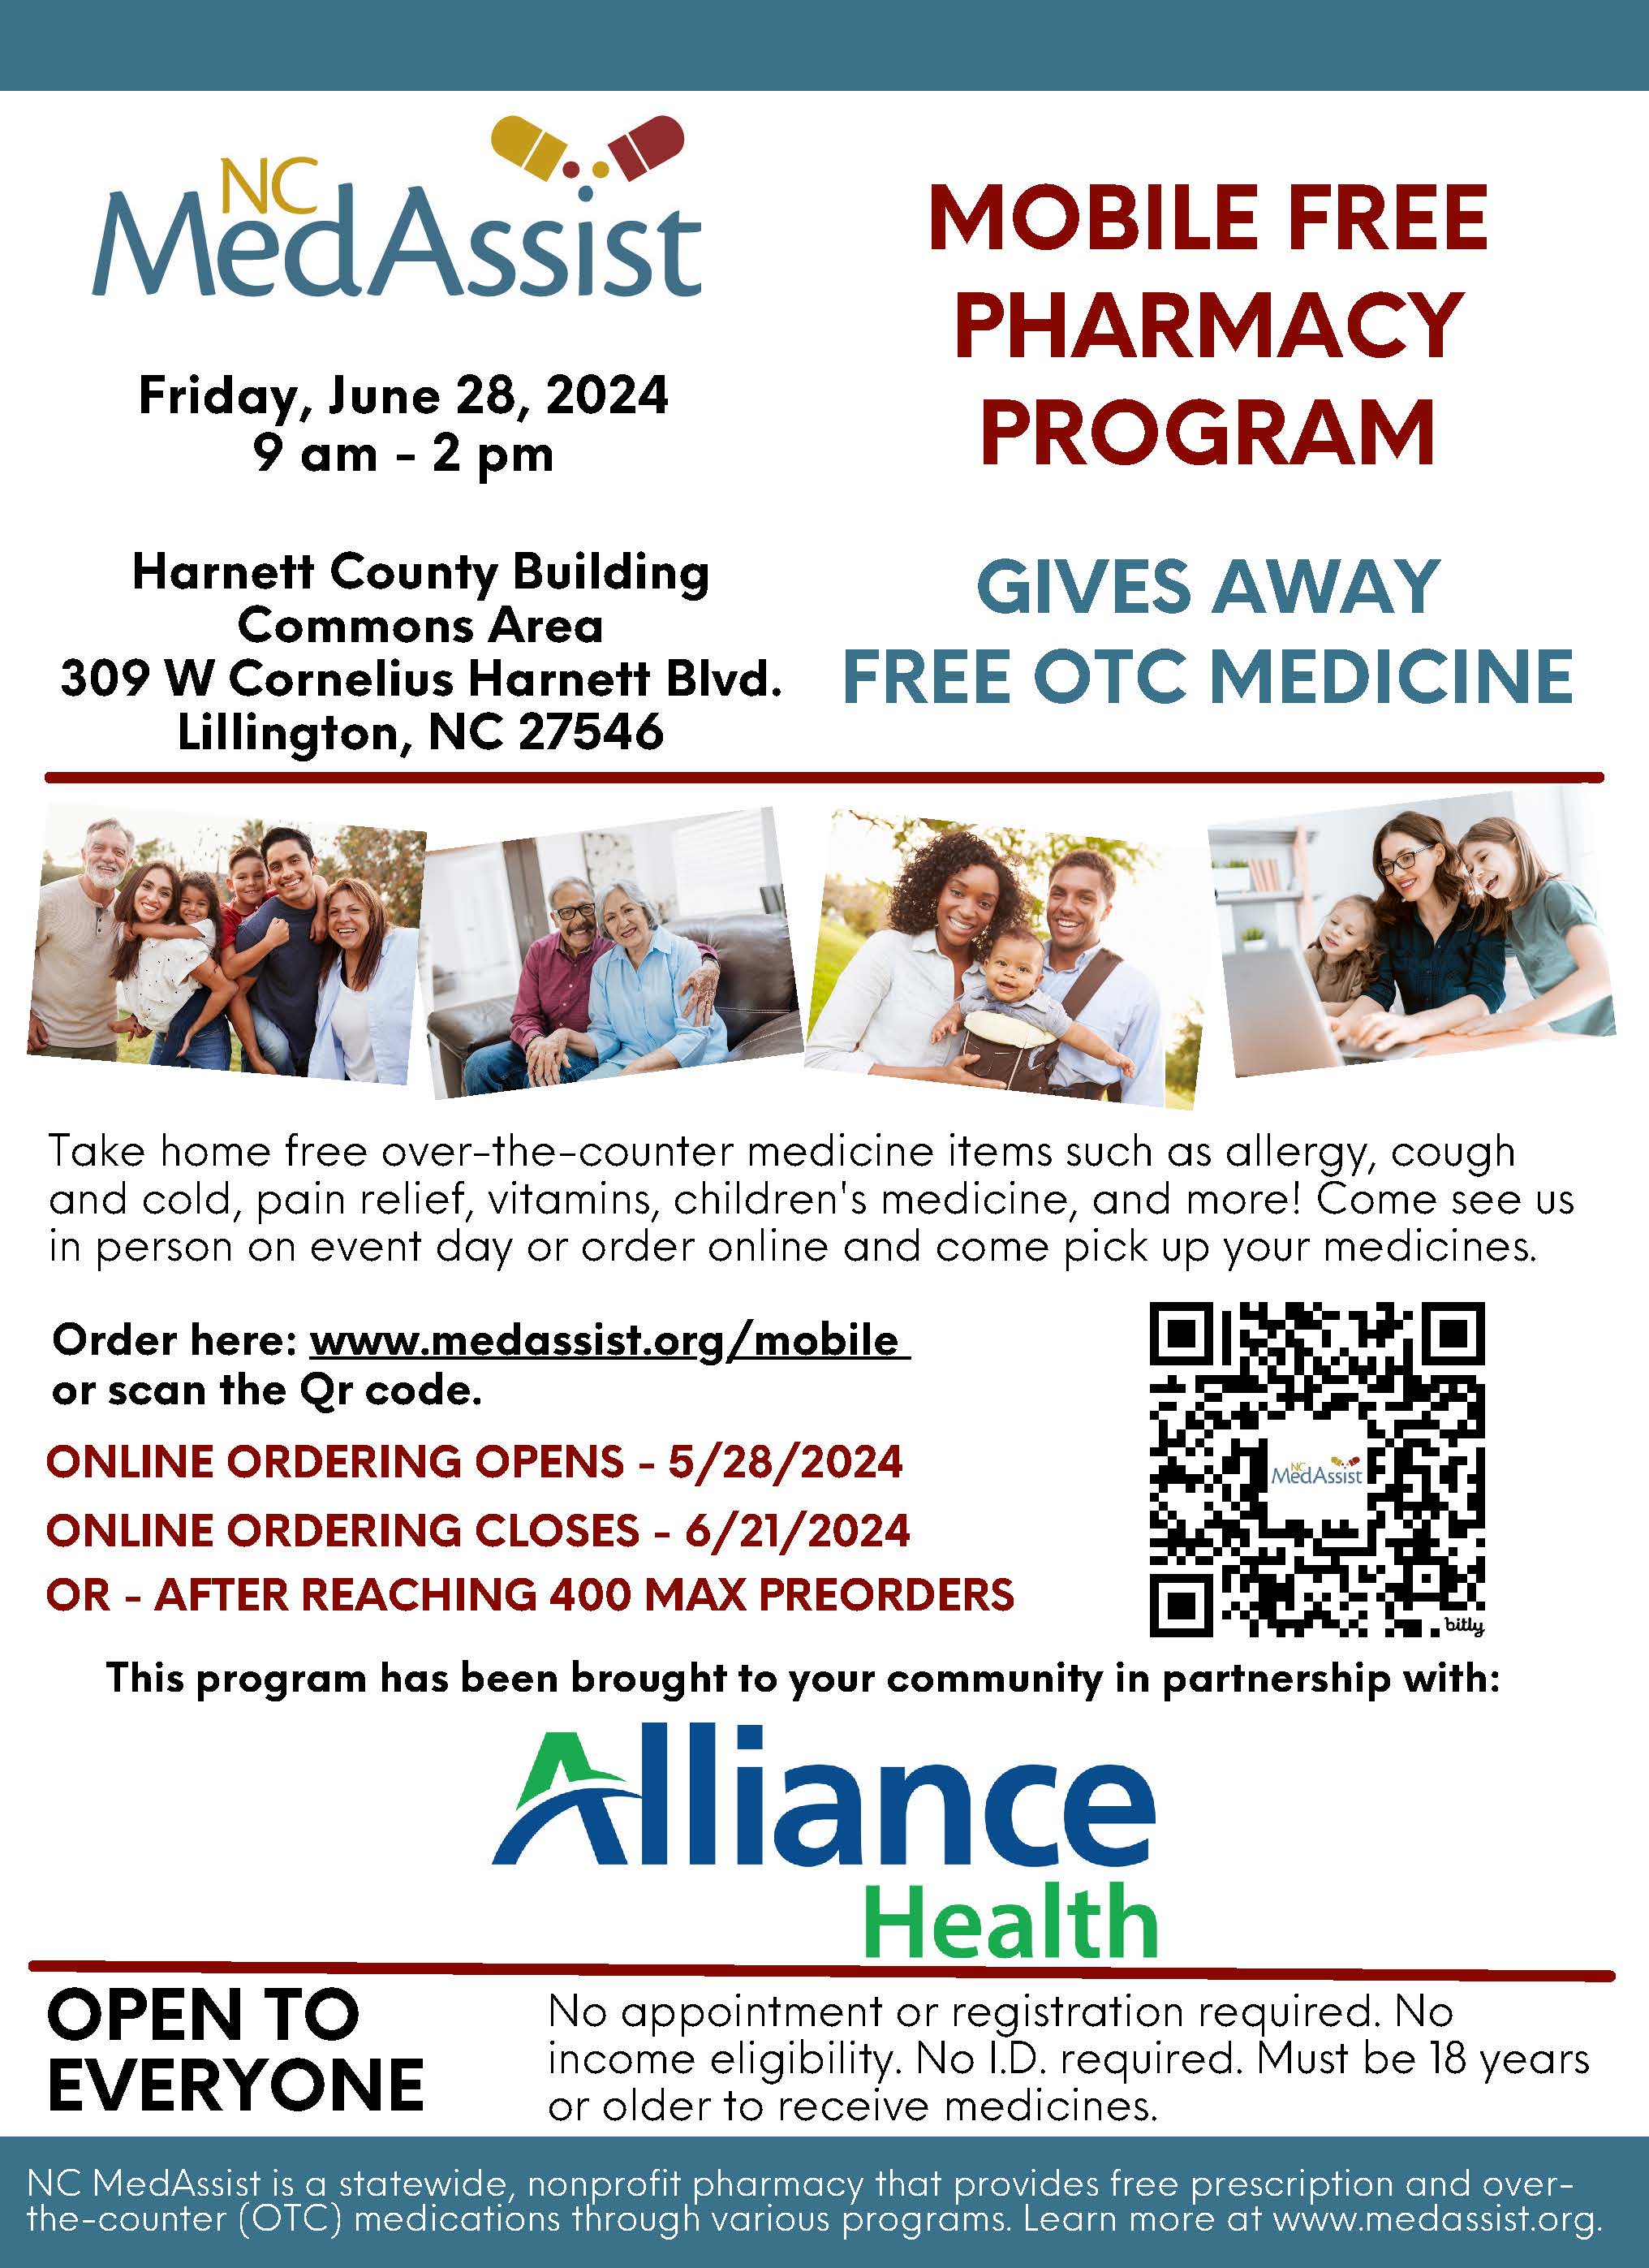 Free over-the-counter medicine items: June 28, 2024